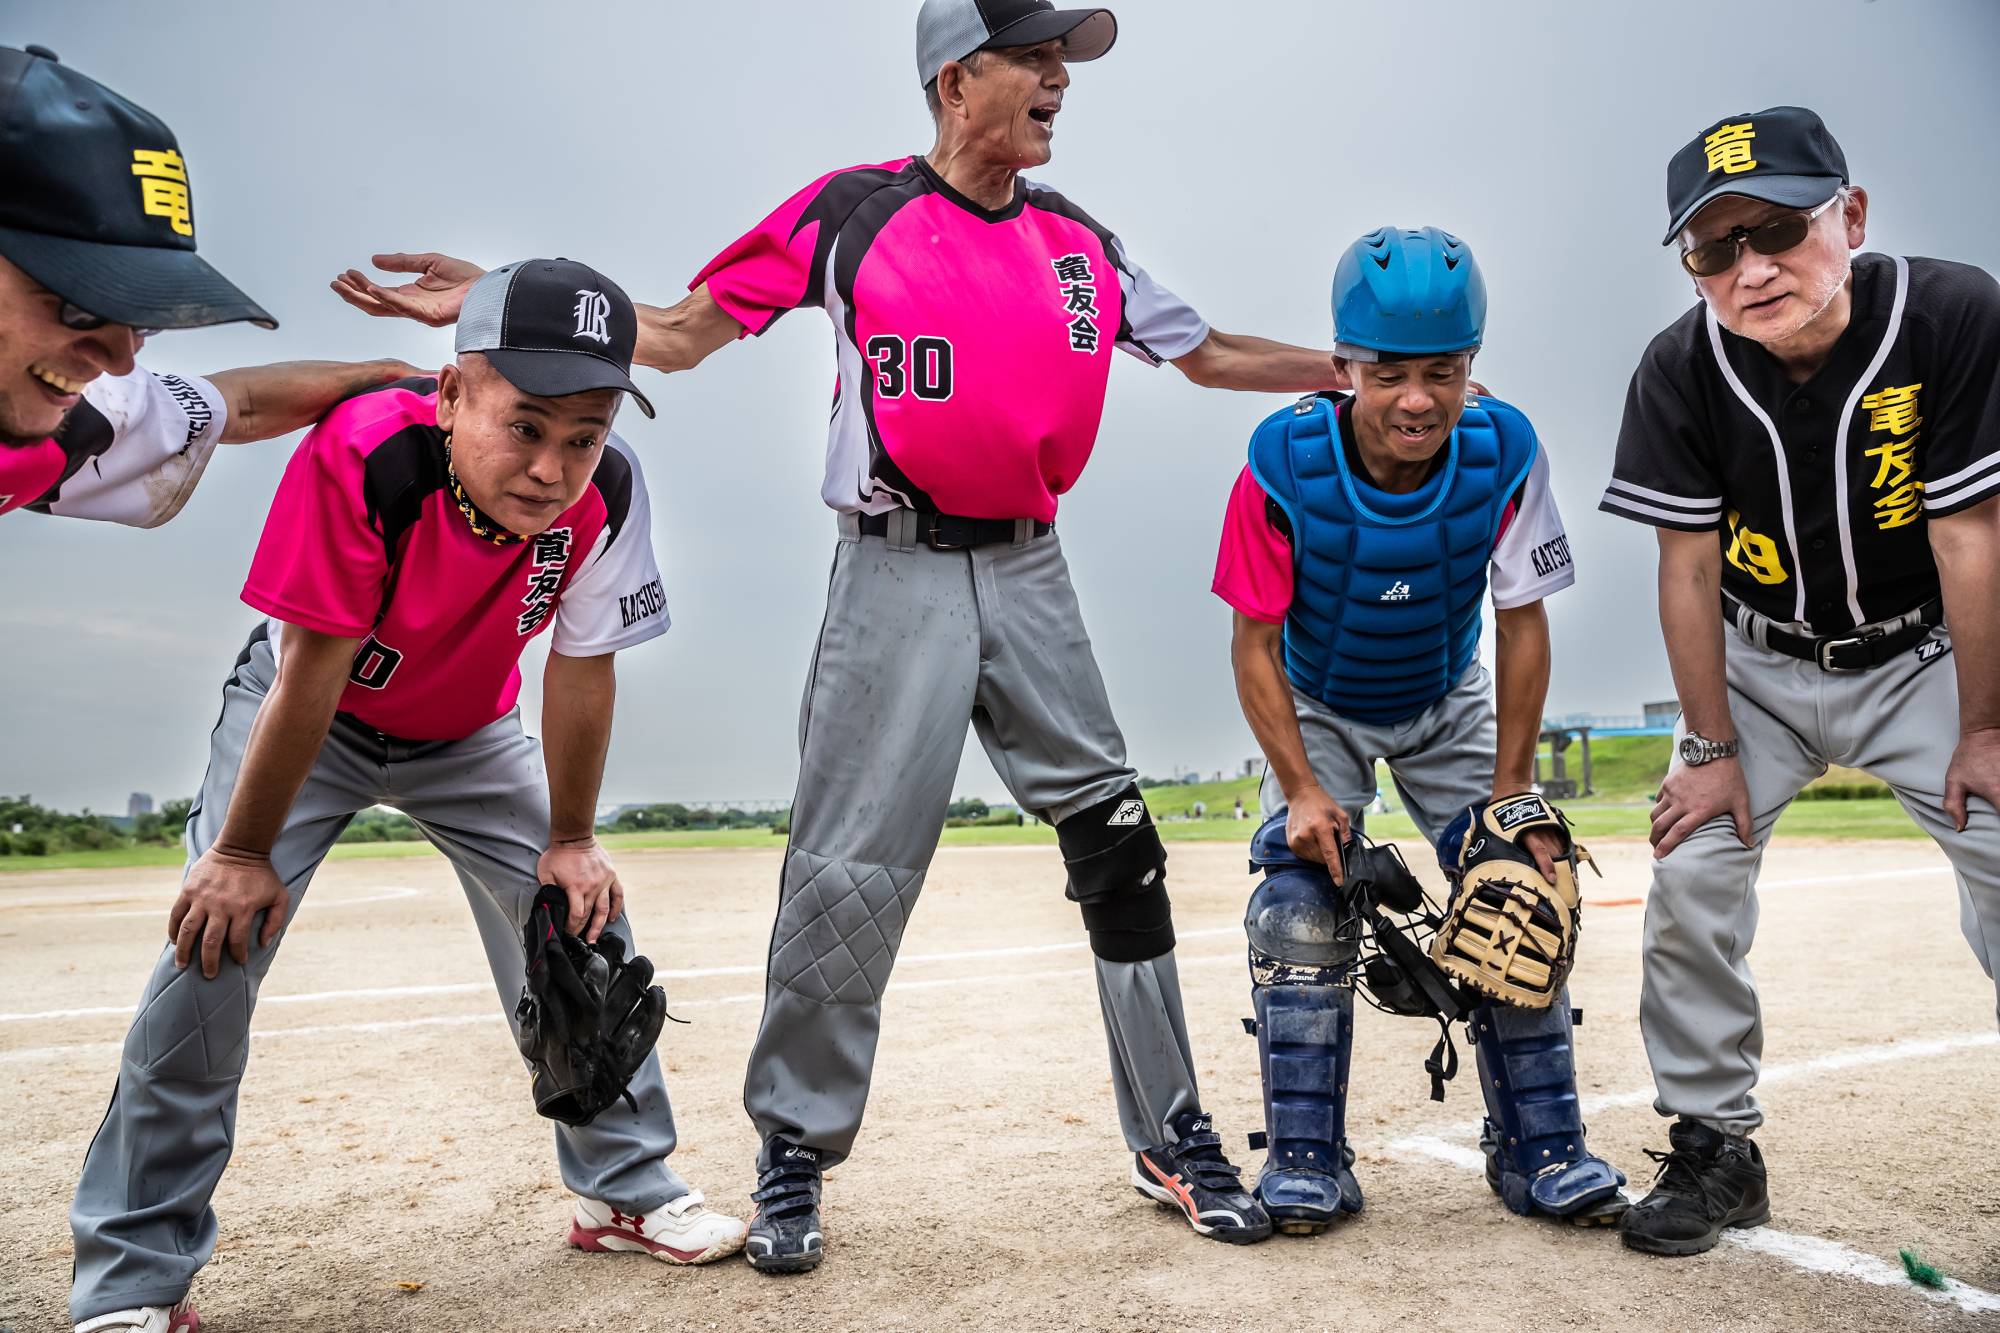 What's a Japanese mobster to do in retirement? Join a softball